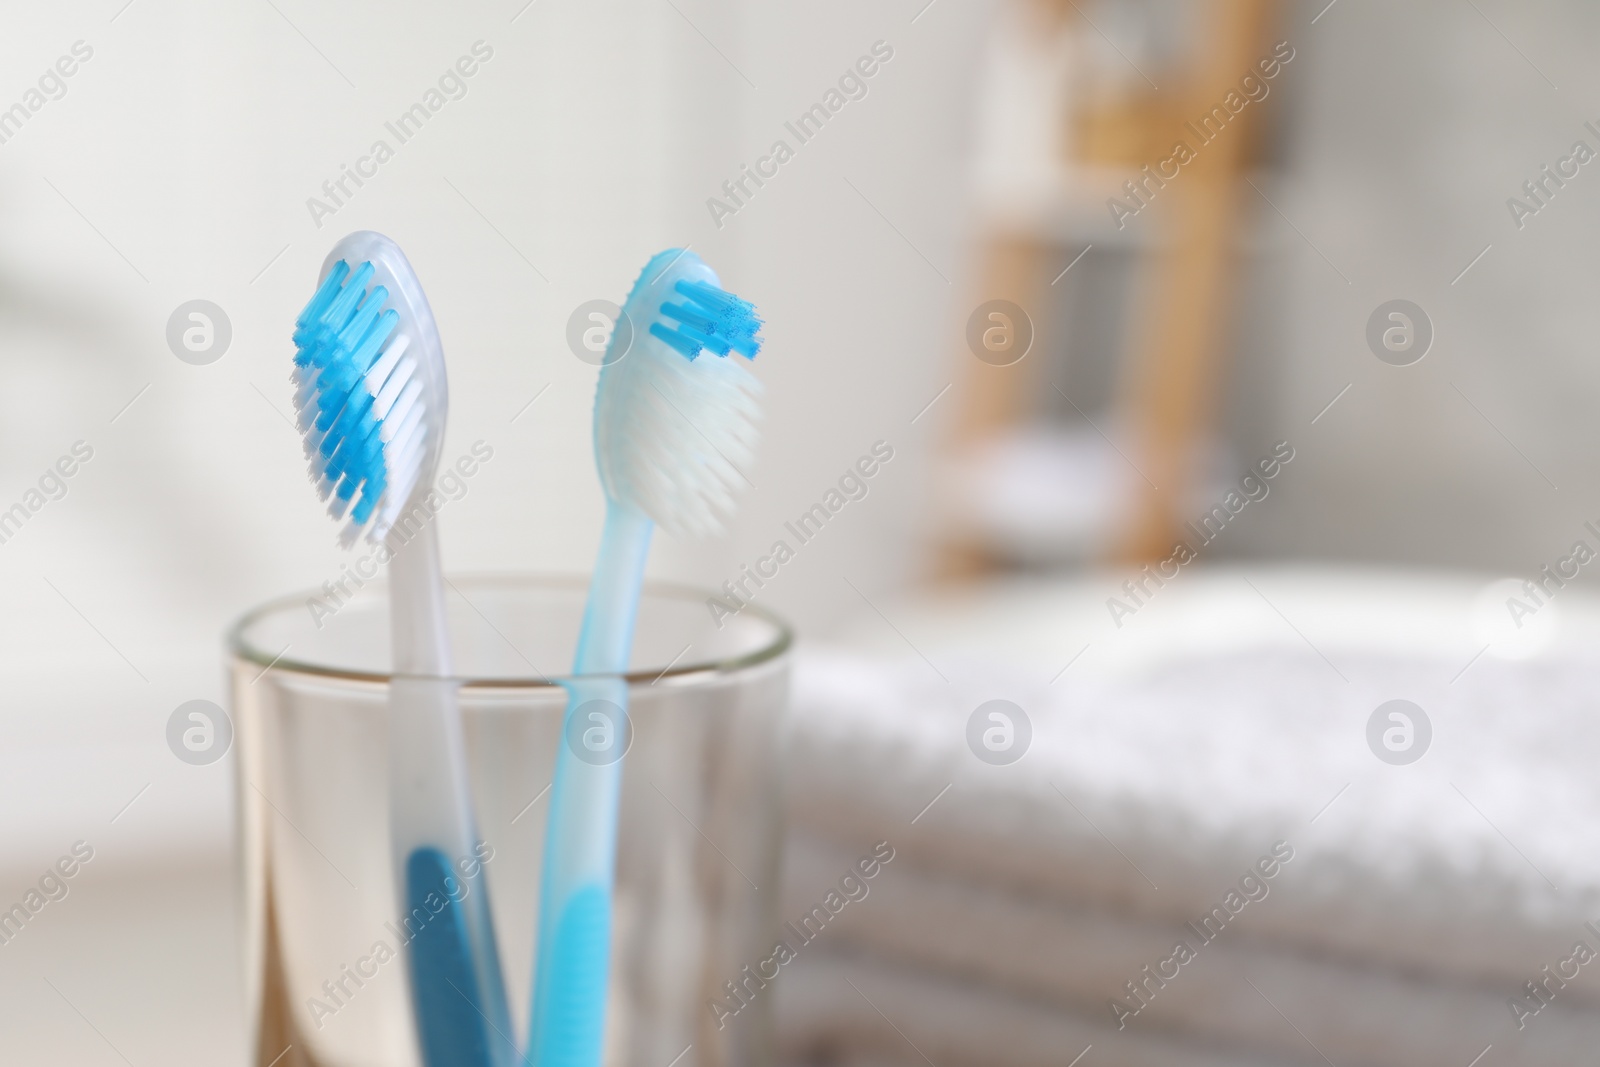 Photo of Plastic toothbrushes in glass holder on blurred background, closeup. Space for text